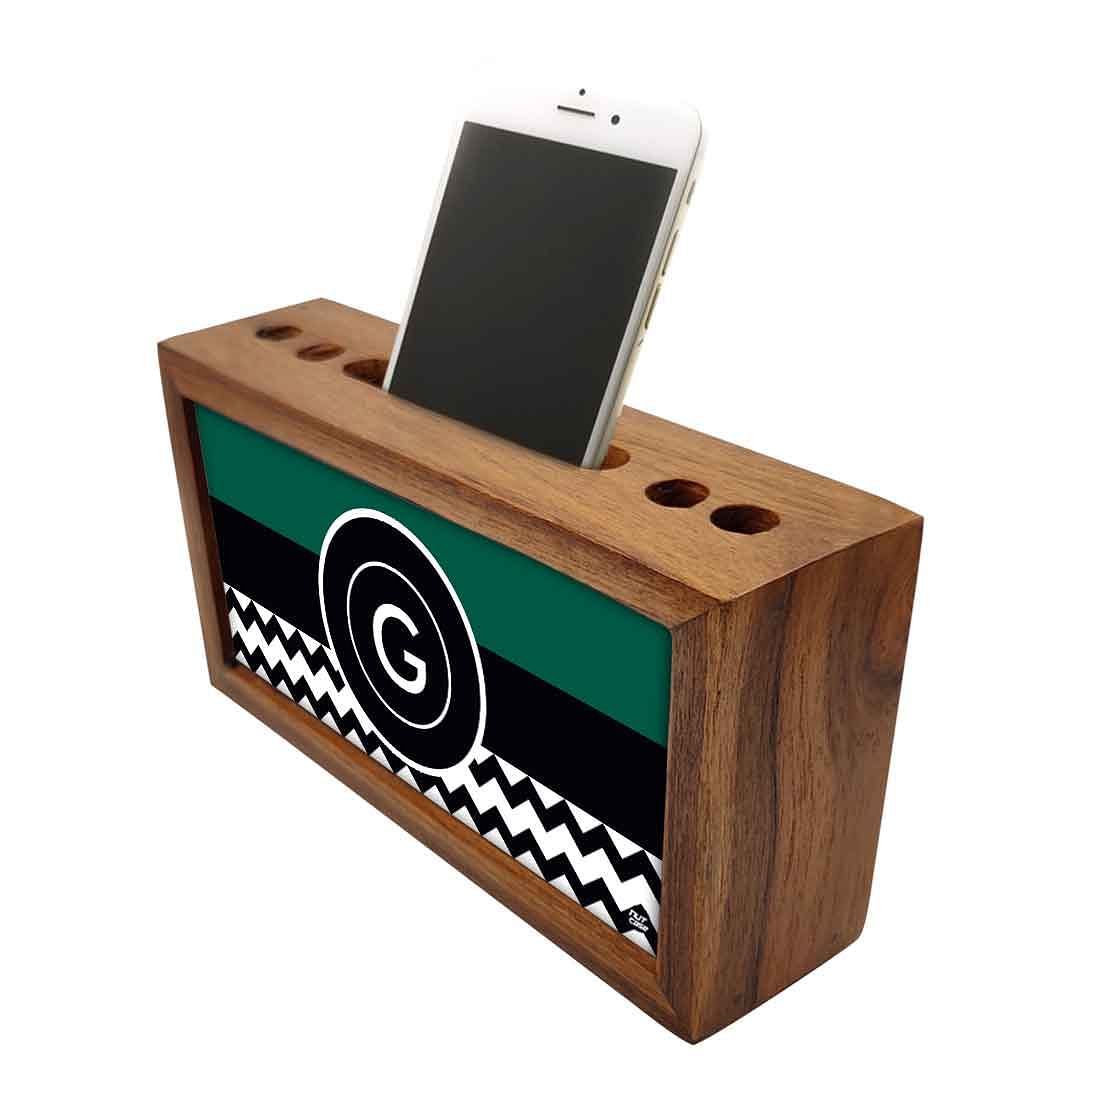 Custom-Made Wooden Desk Organiser - Green Colored with Initial Nutcase